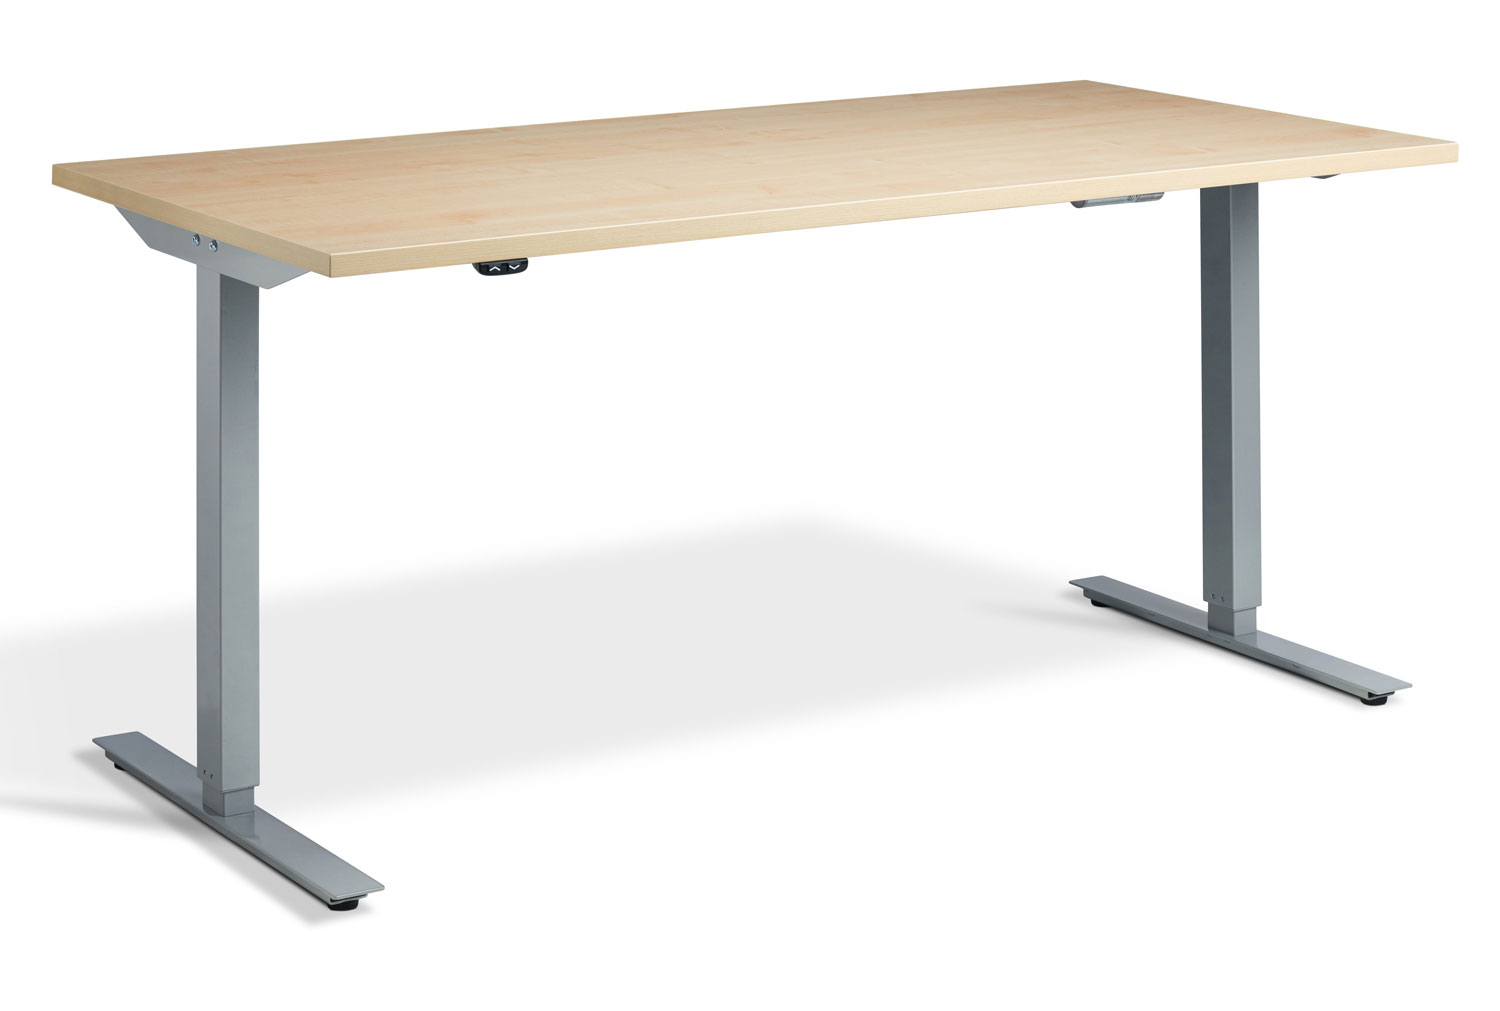 Calgary Dual Motor Height Adjustable Office Desk, 120wx70dx70-120h (cm), Silver Frame, Maple, Fully Installed